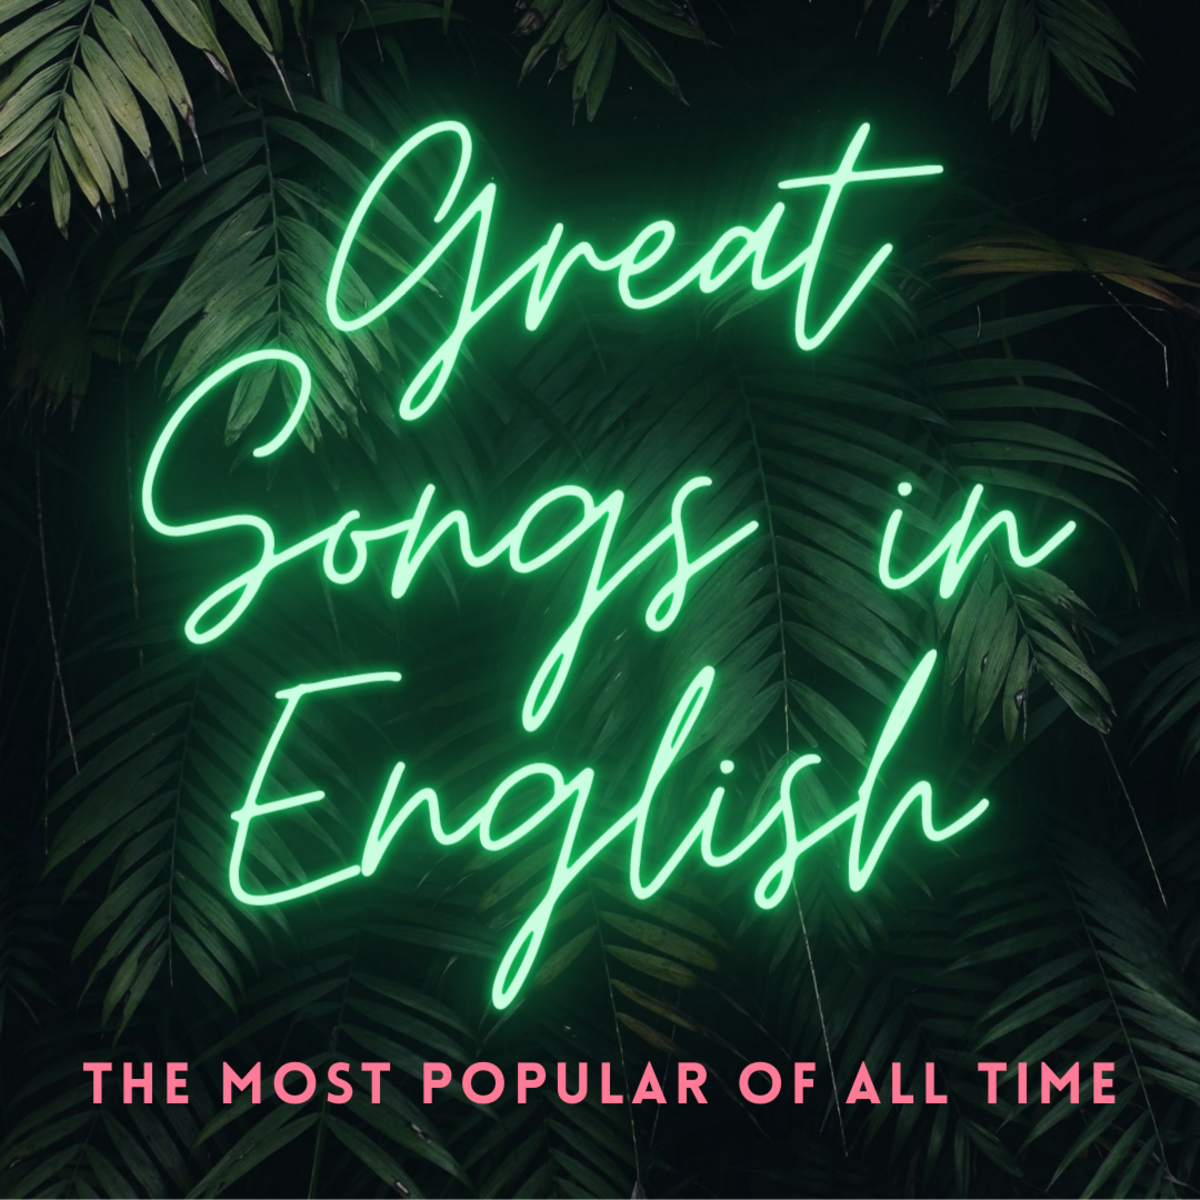 Top 300 Most Popular English Songs of All Time